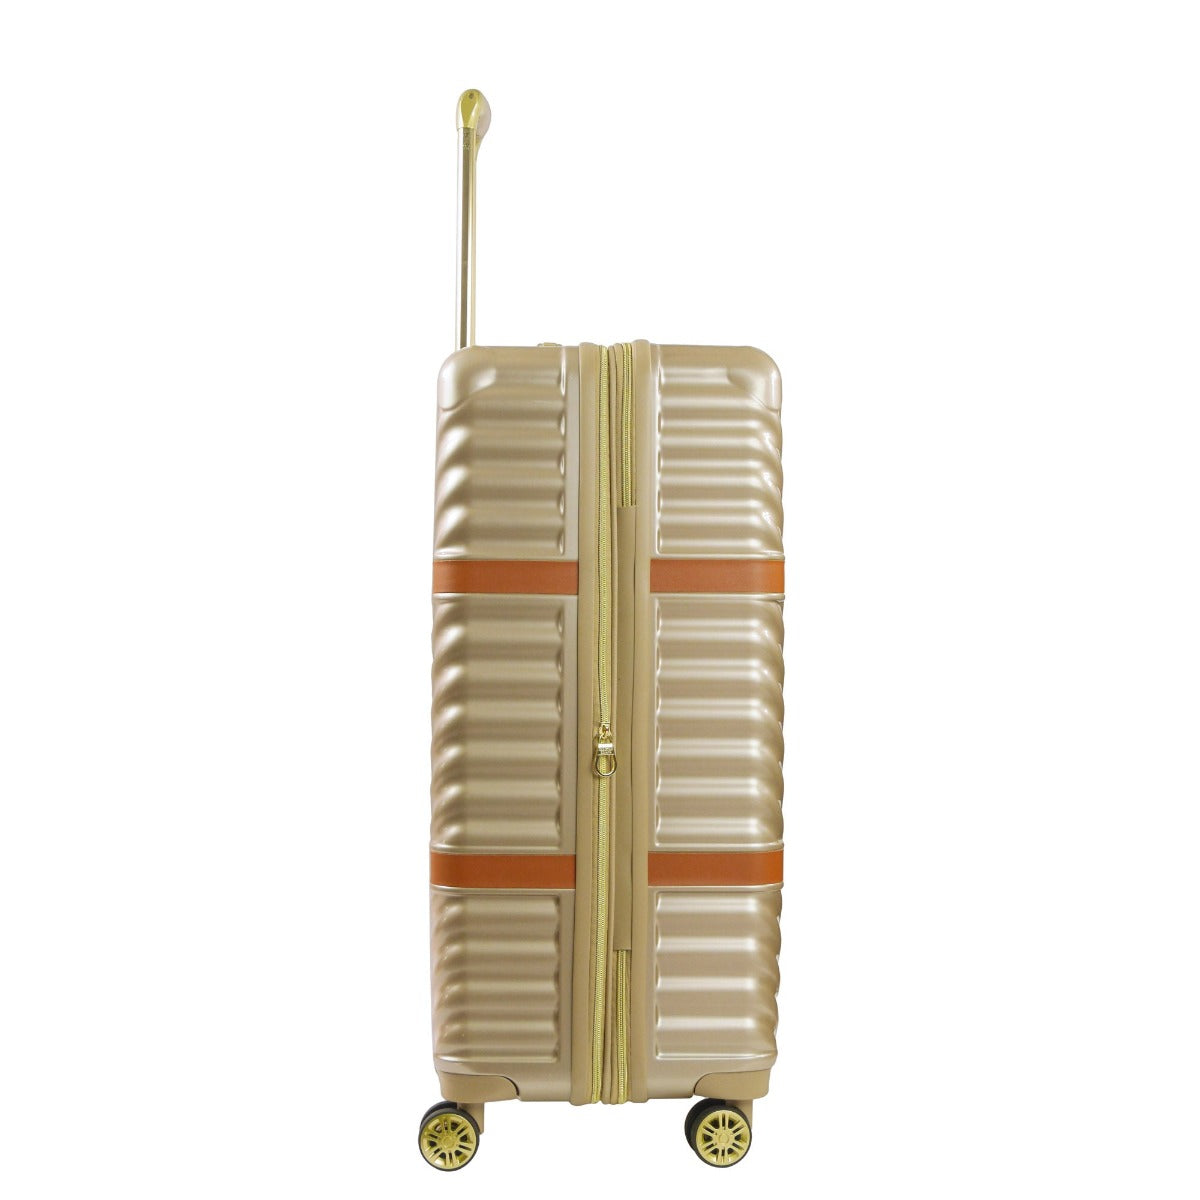 Christian Siriano New York Stella 29" hardside spinner luggage taupe - best durable suitcase for travelling